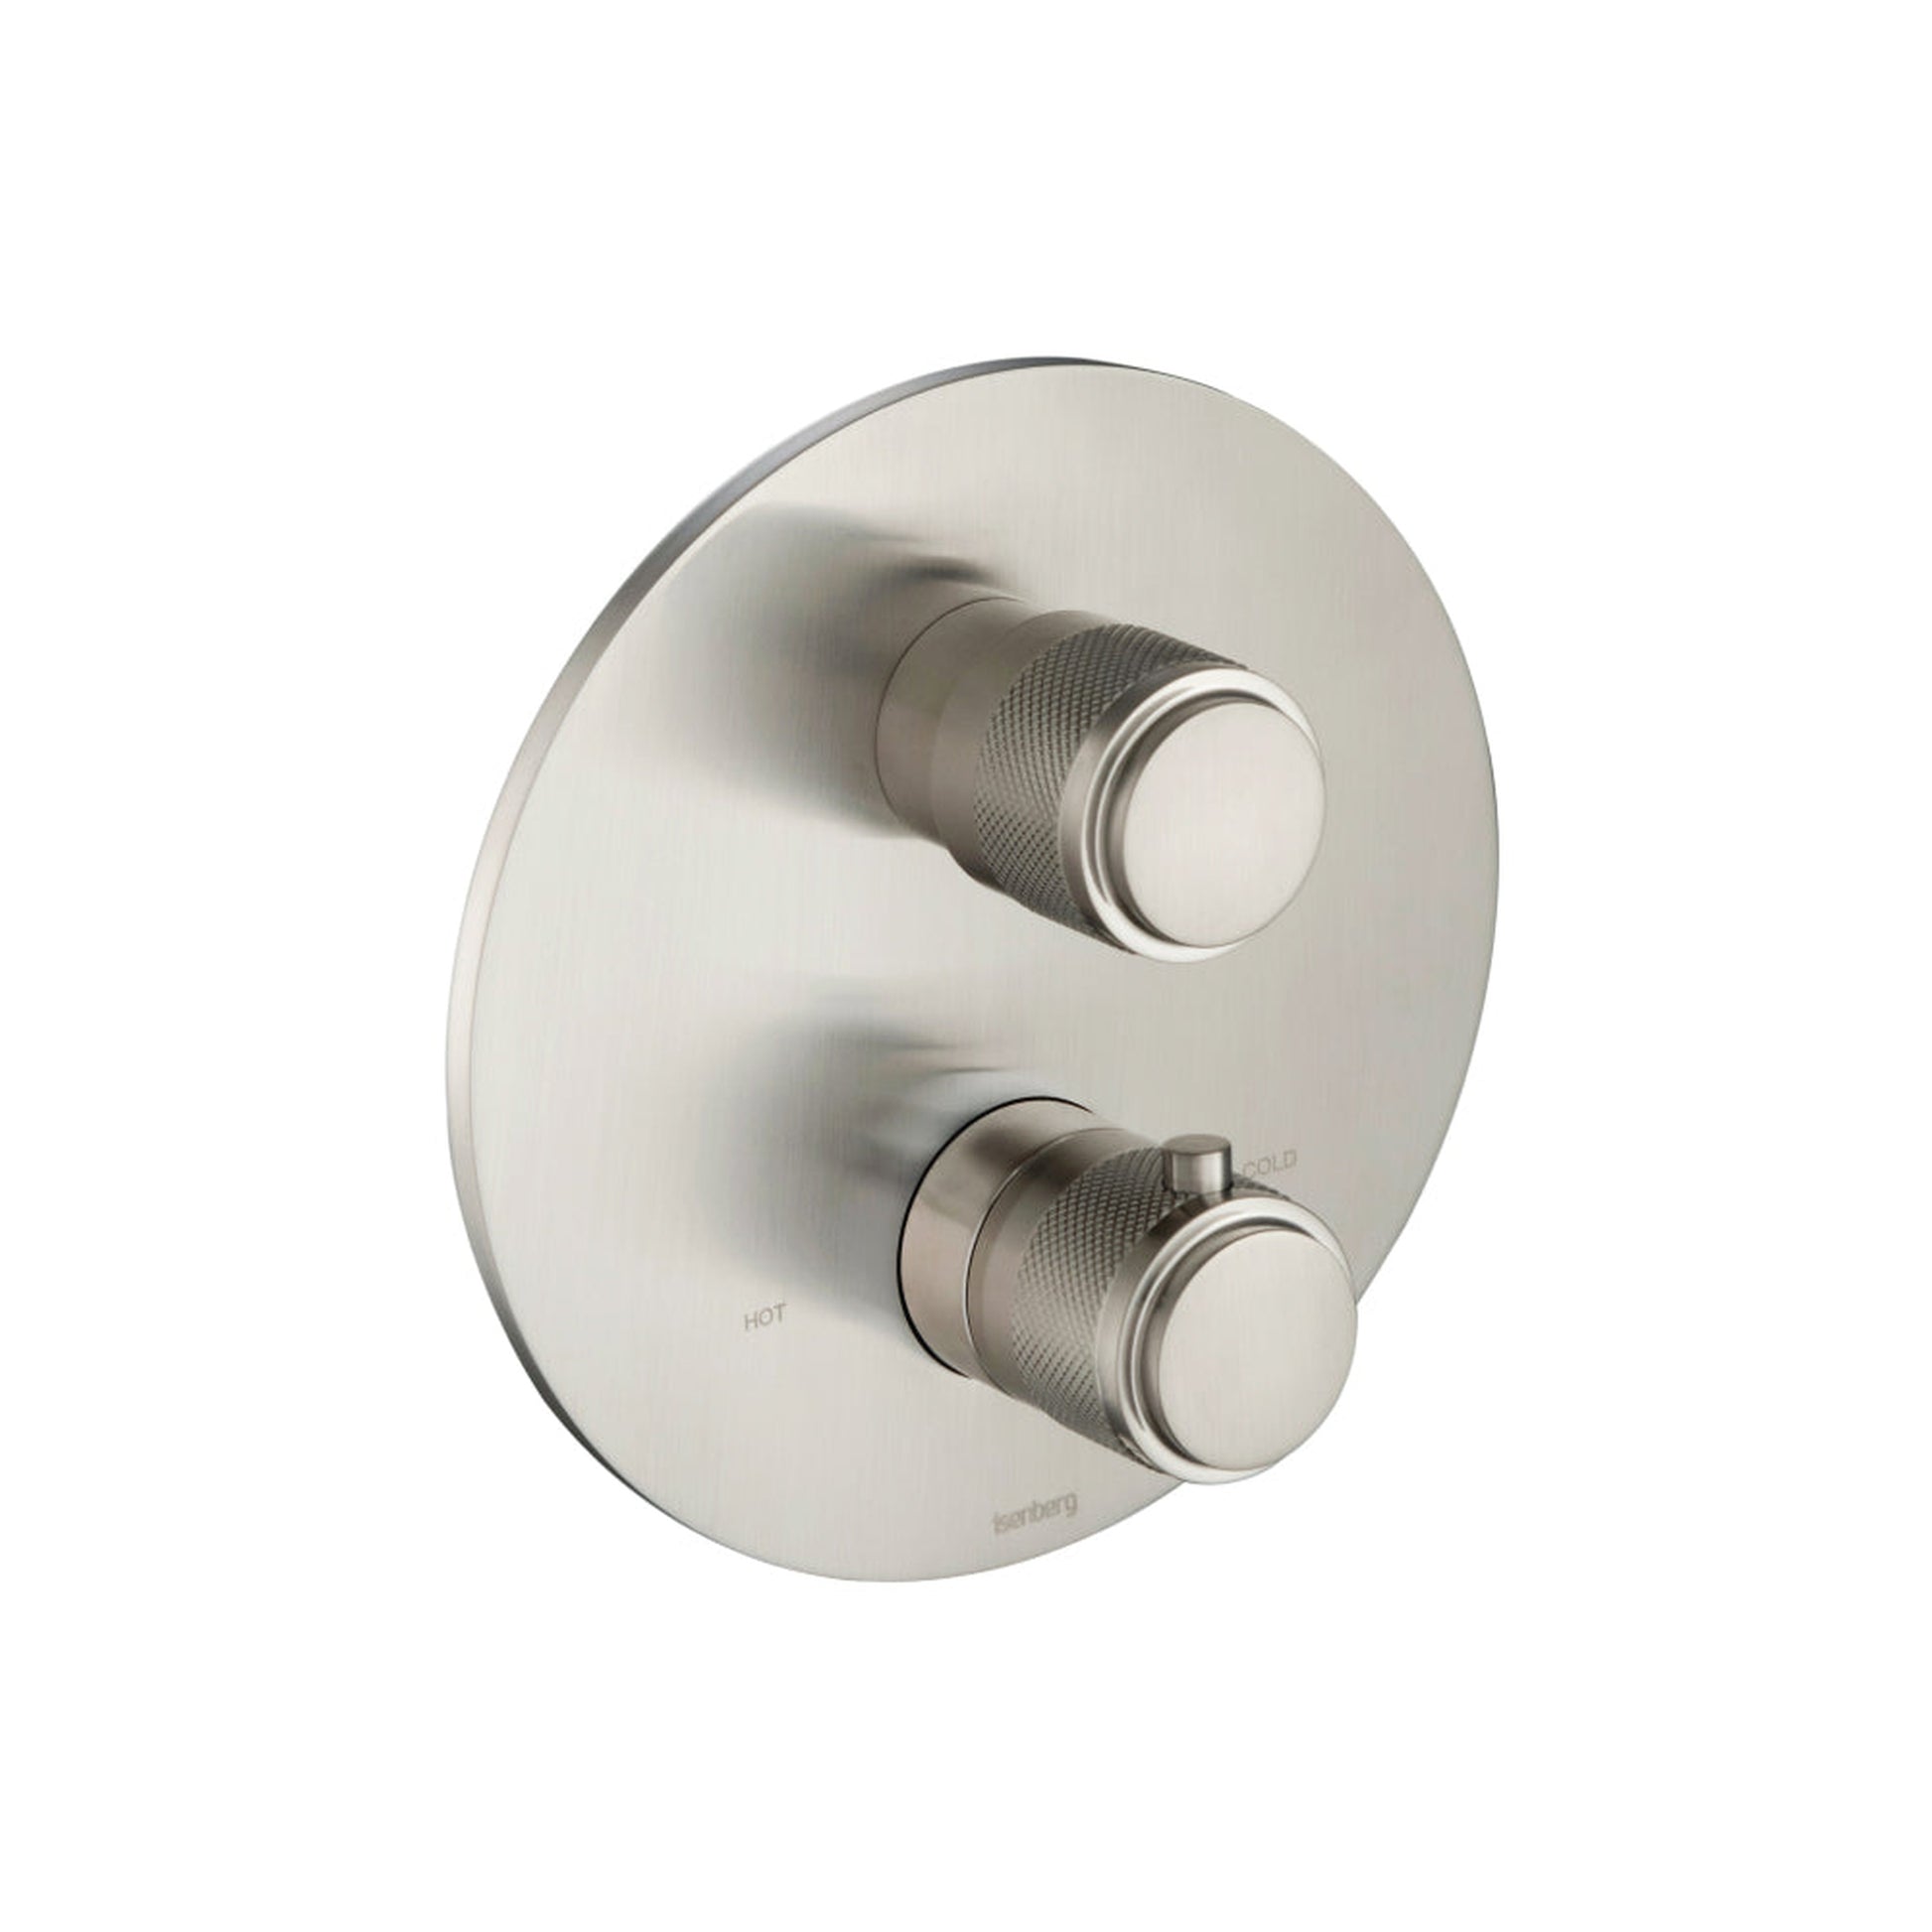 Isenberg Serie 250 Trim for Thermostatic Valve in Brushed Nickel